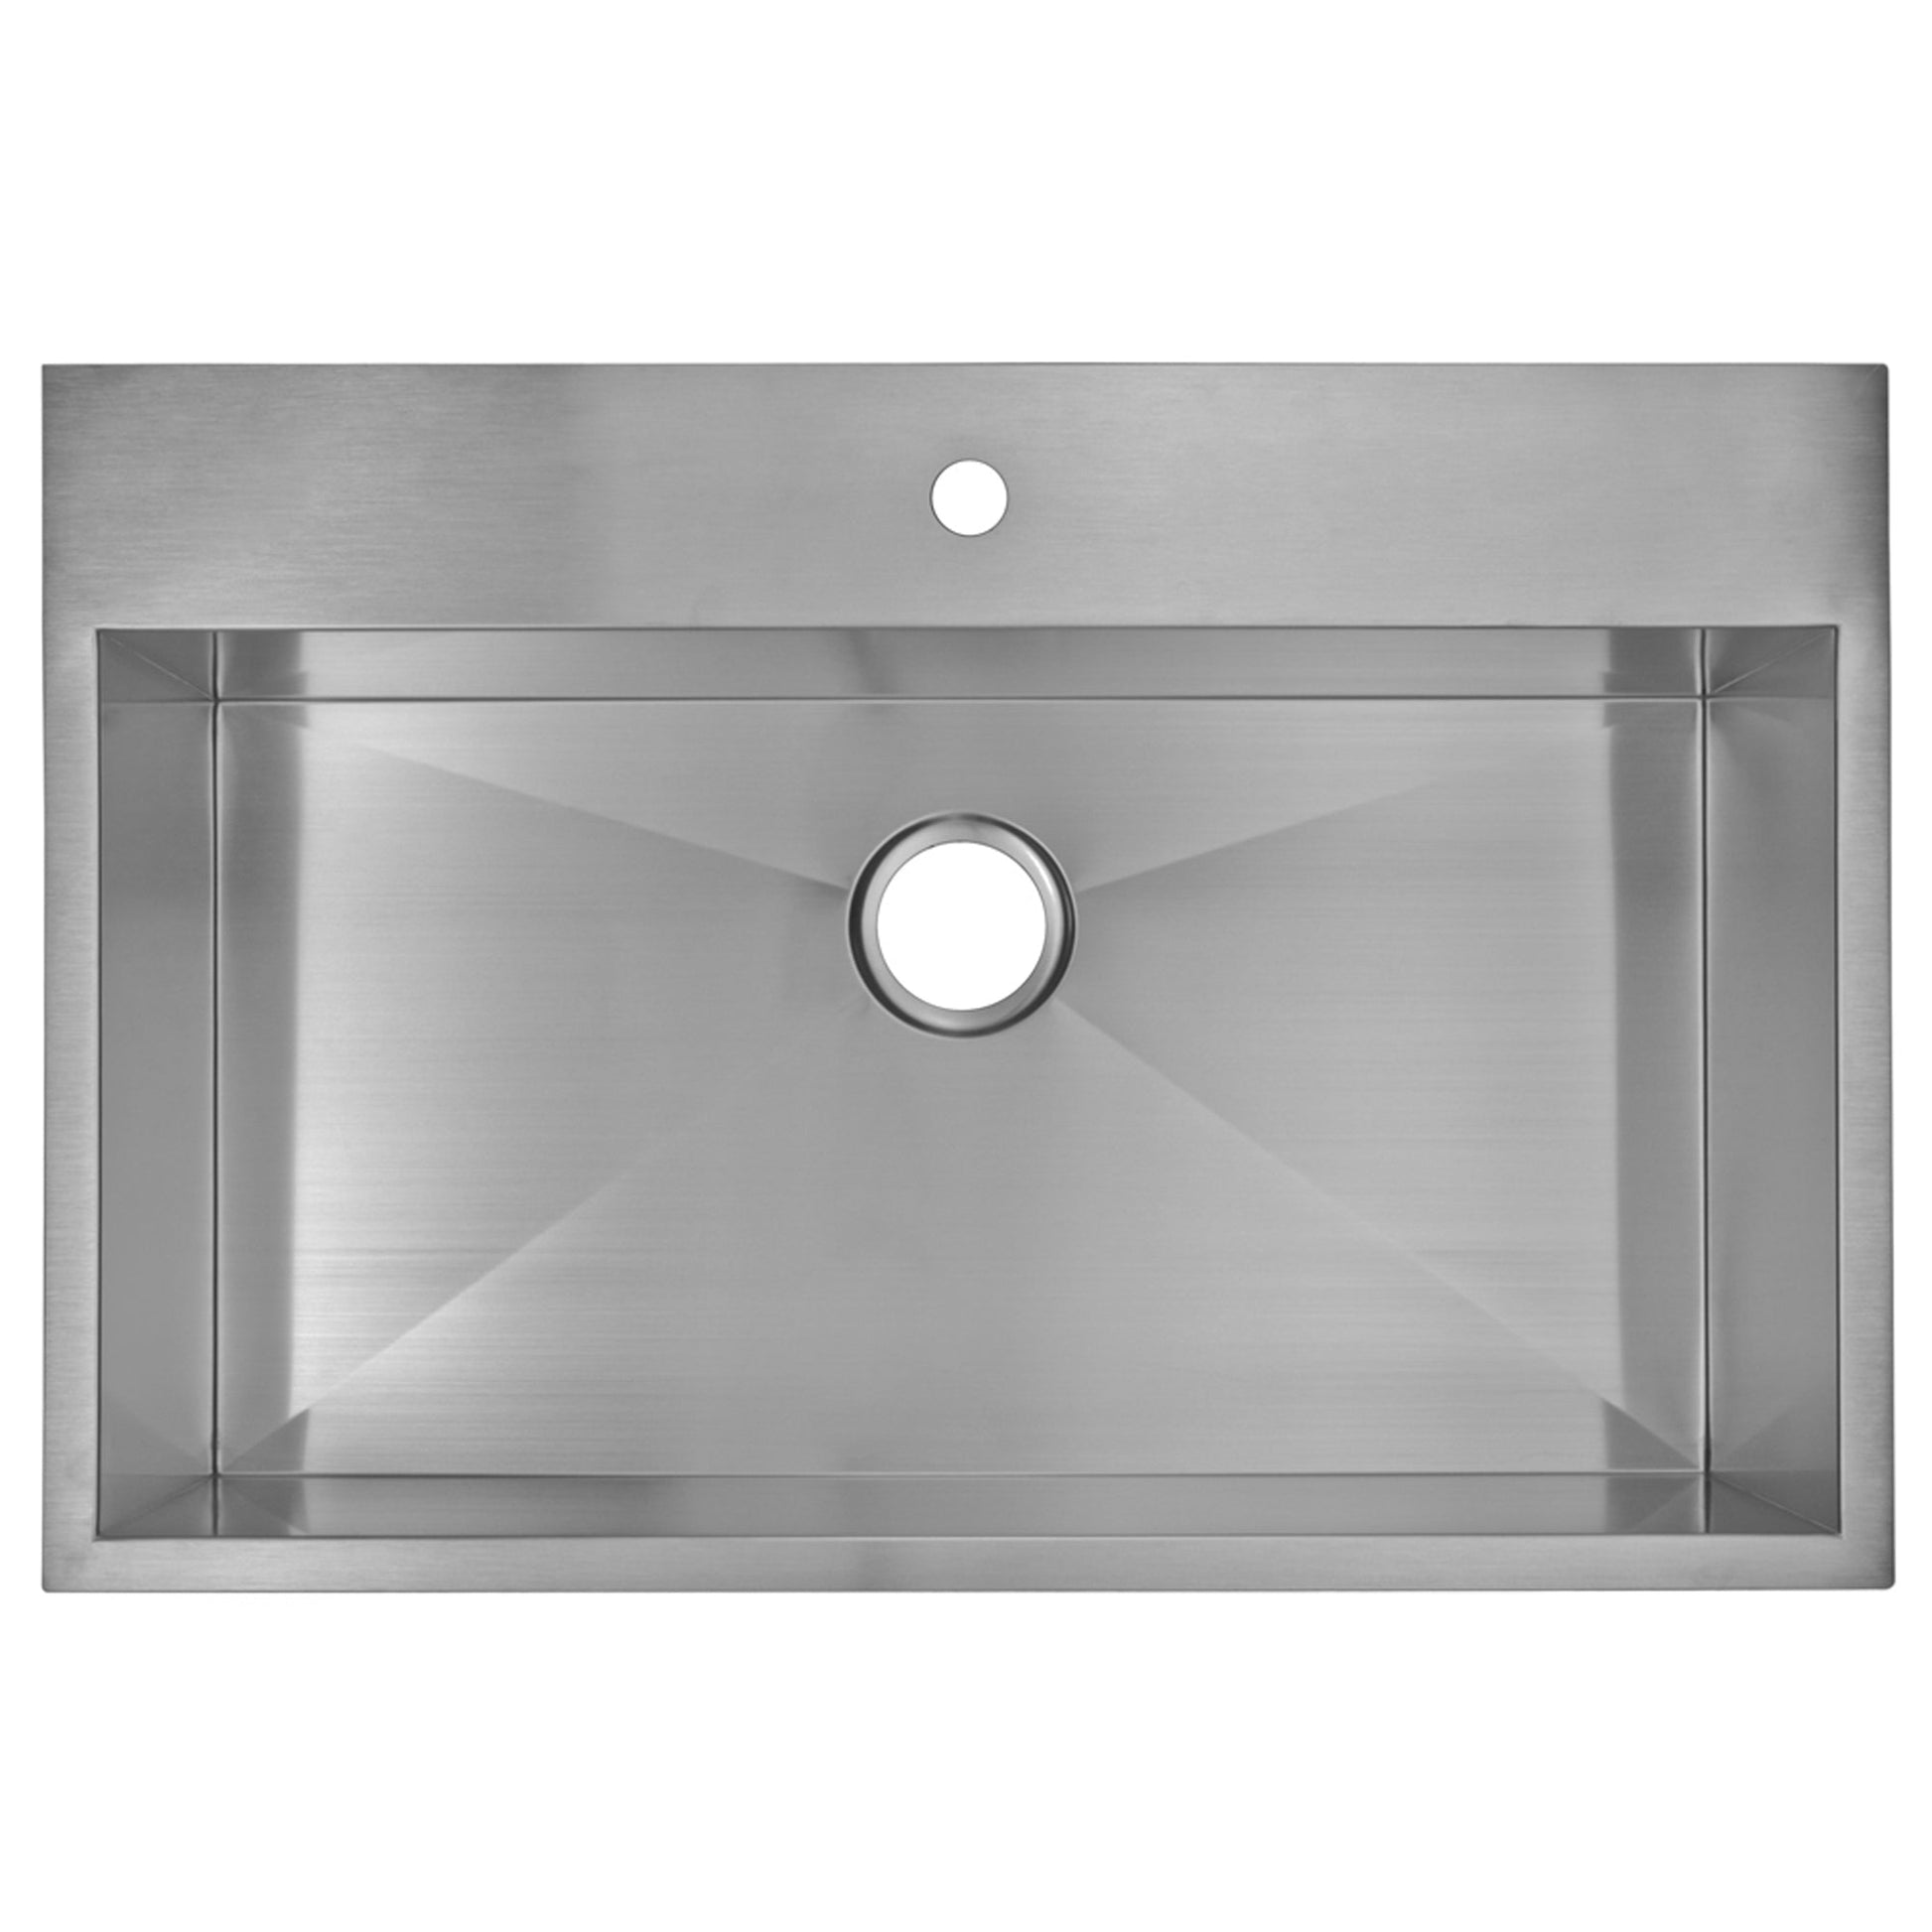 Water Creation Zero Radius Single Bowl Stainless Steel Hand Made Drop In 33 Inch X 22 Inch Sink